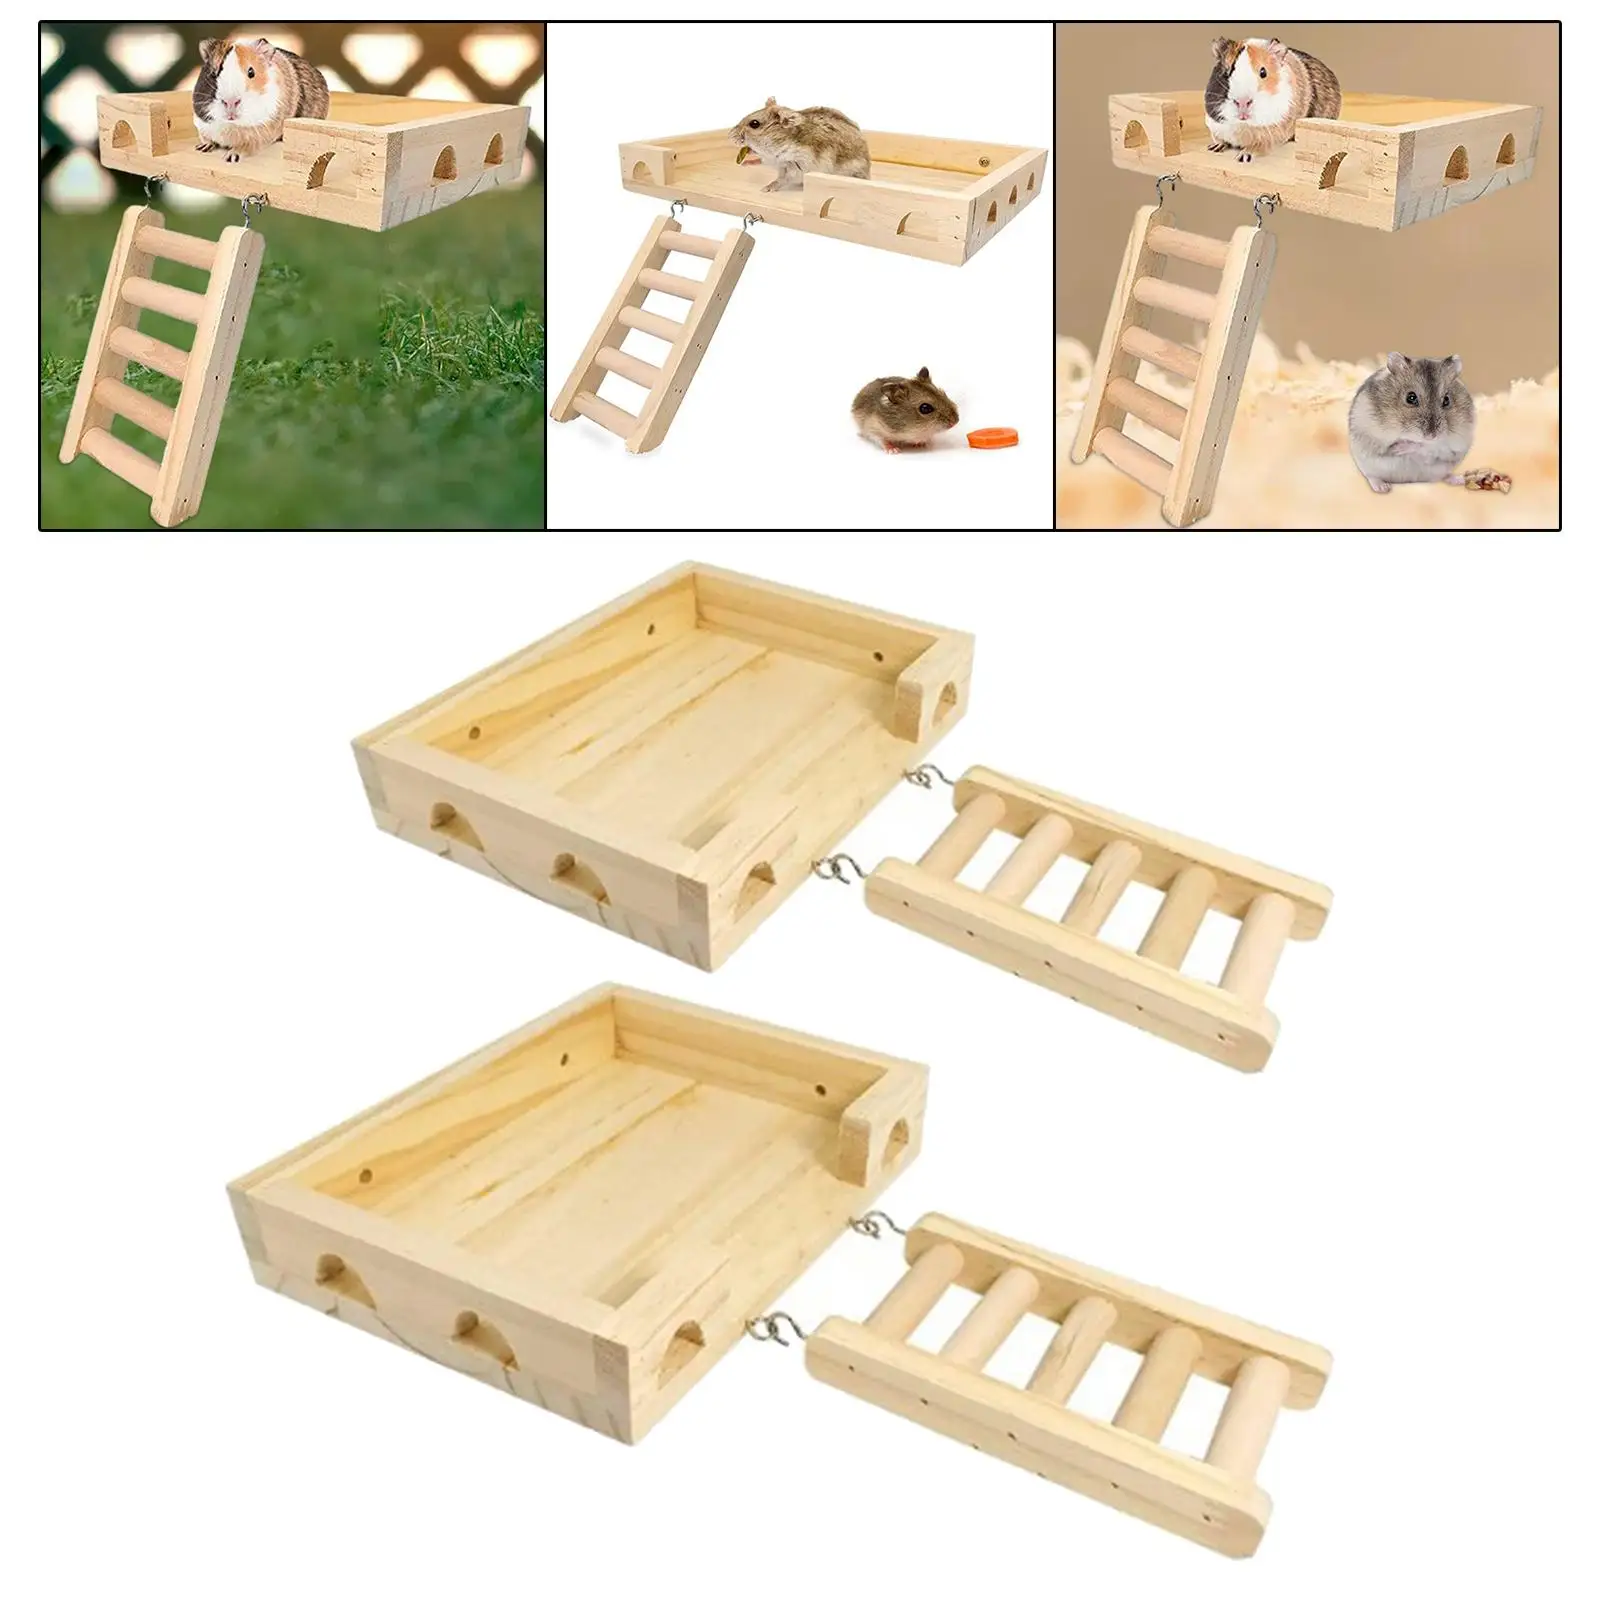 Hamster Wooden Ladder Toy Simple Installation Portable for Parakeets,conures,